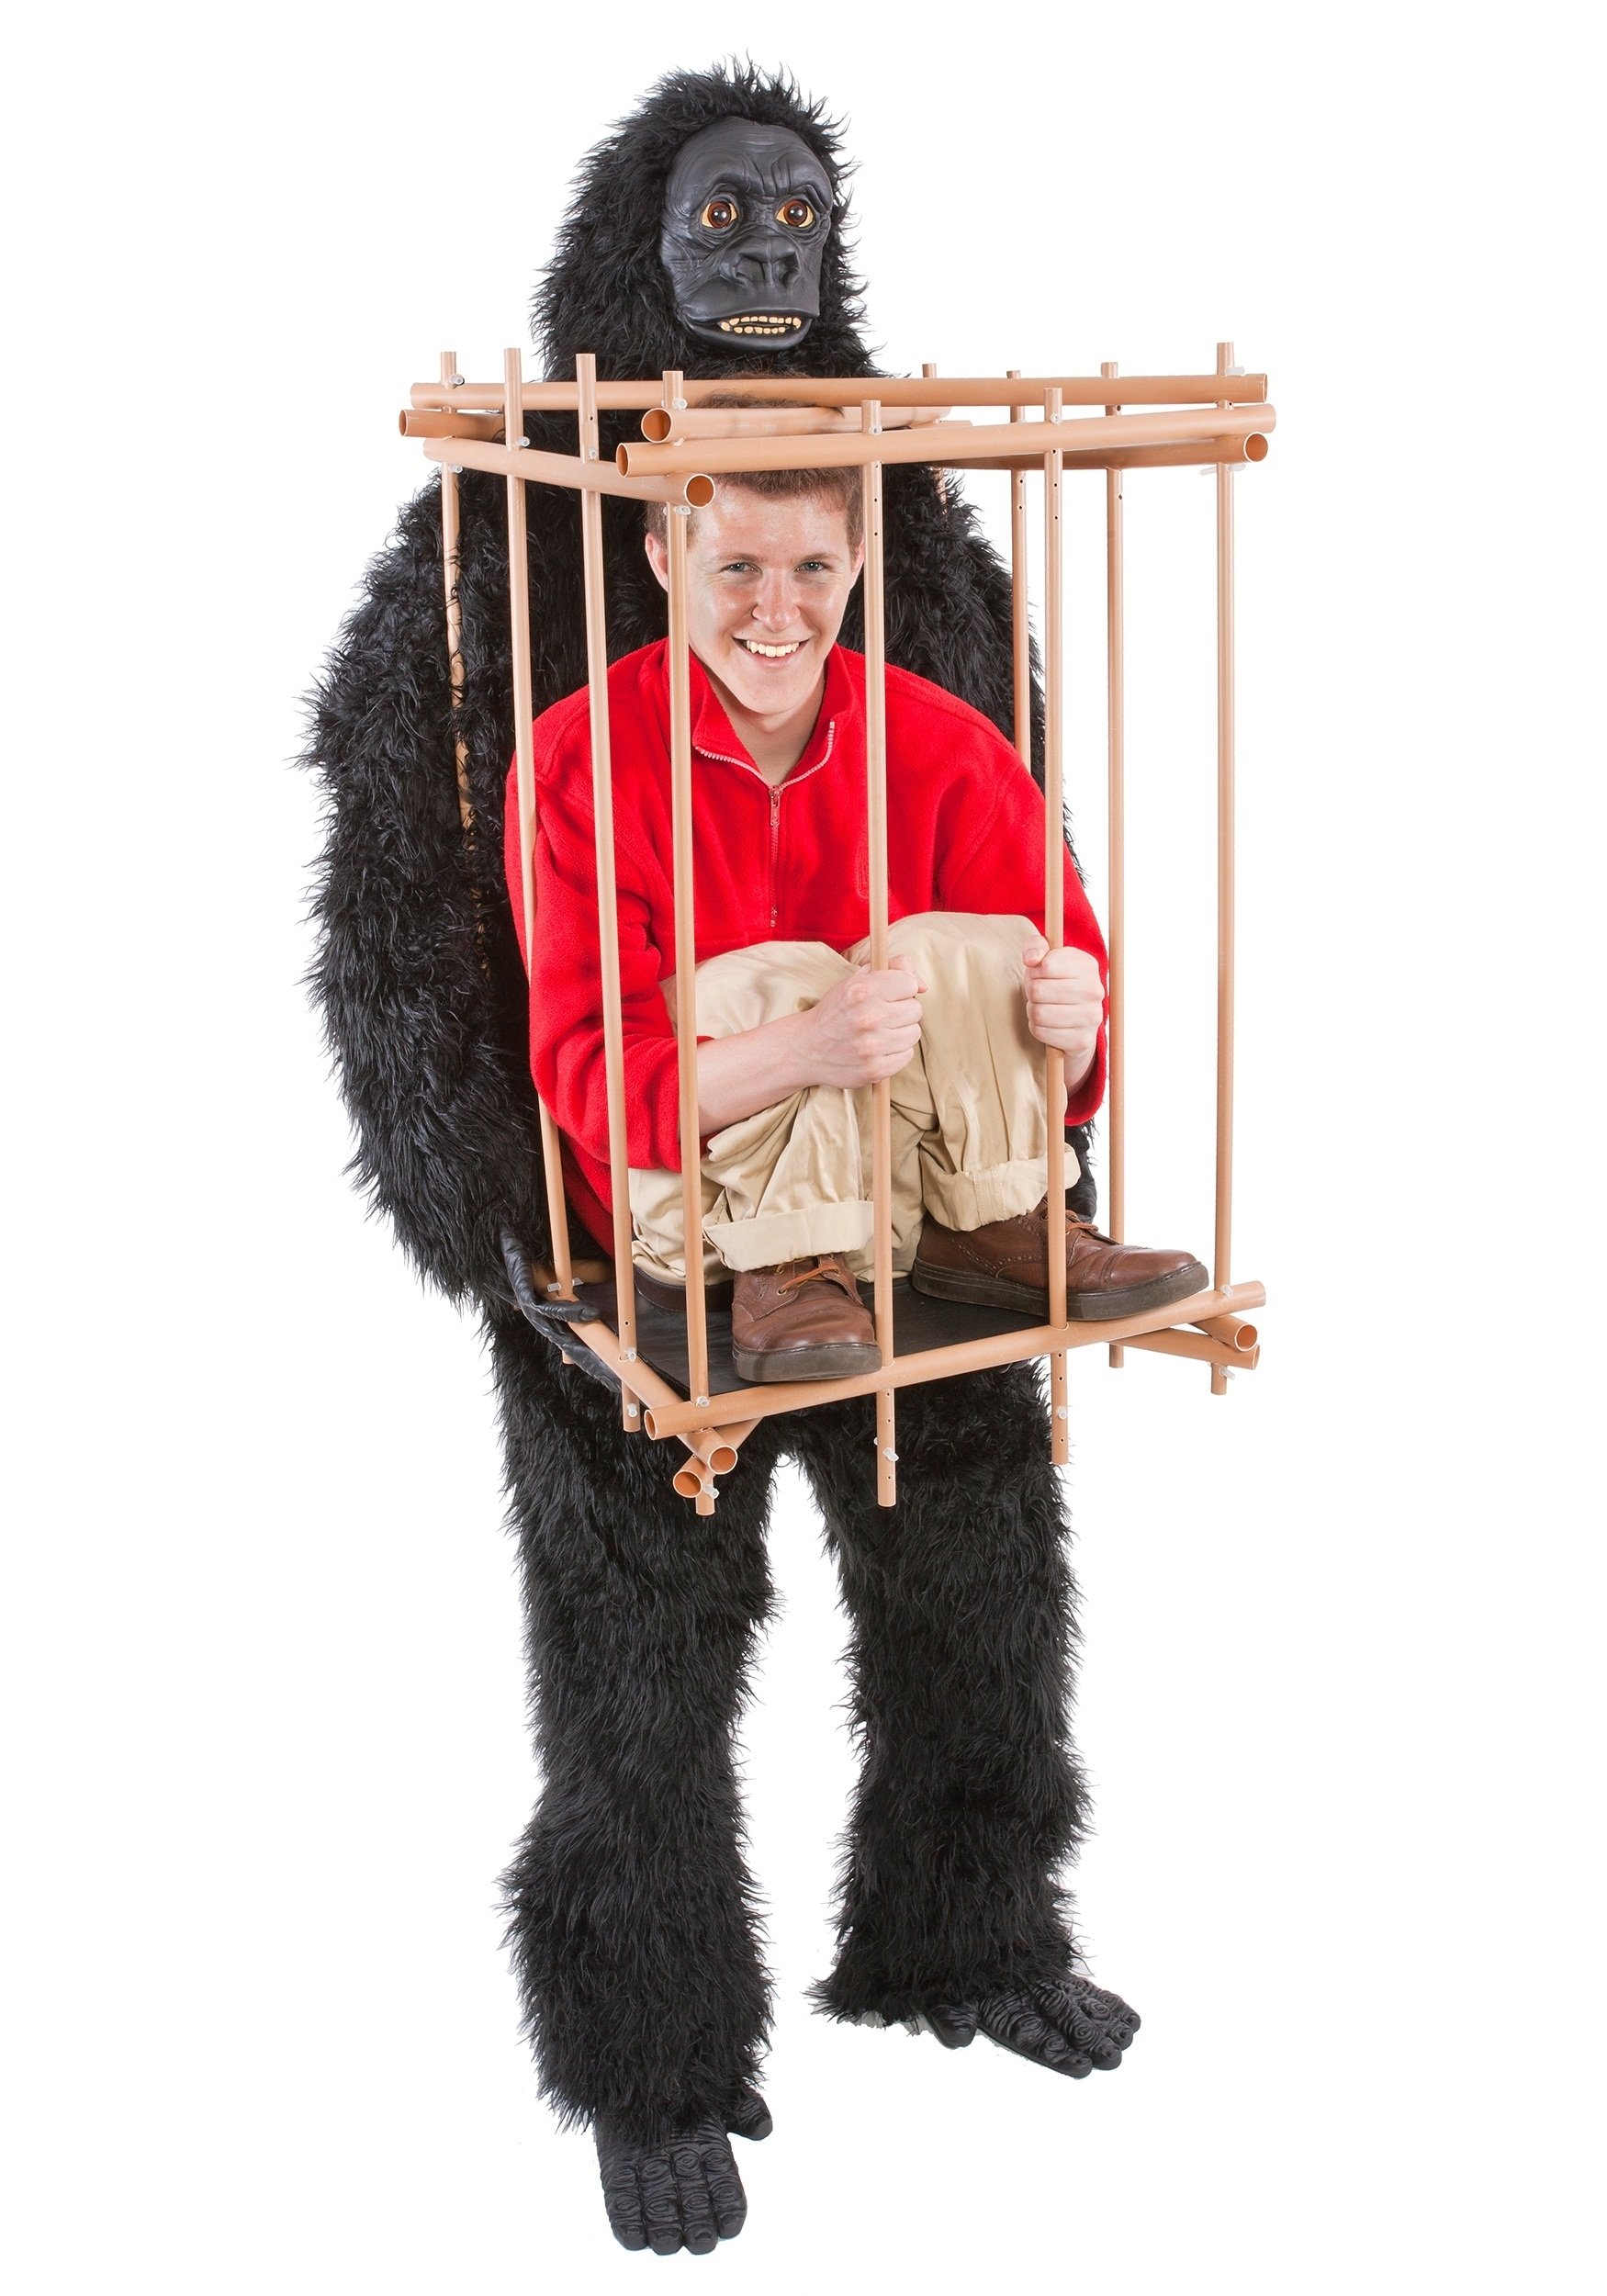 10 Wonderful Costume Ideas For Fat Guys man in a gorilla cage costume funny halloween costumes for fat guys 2022